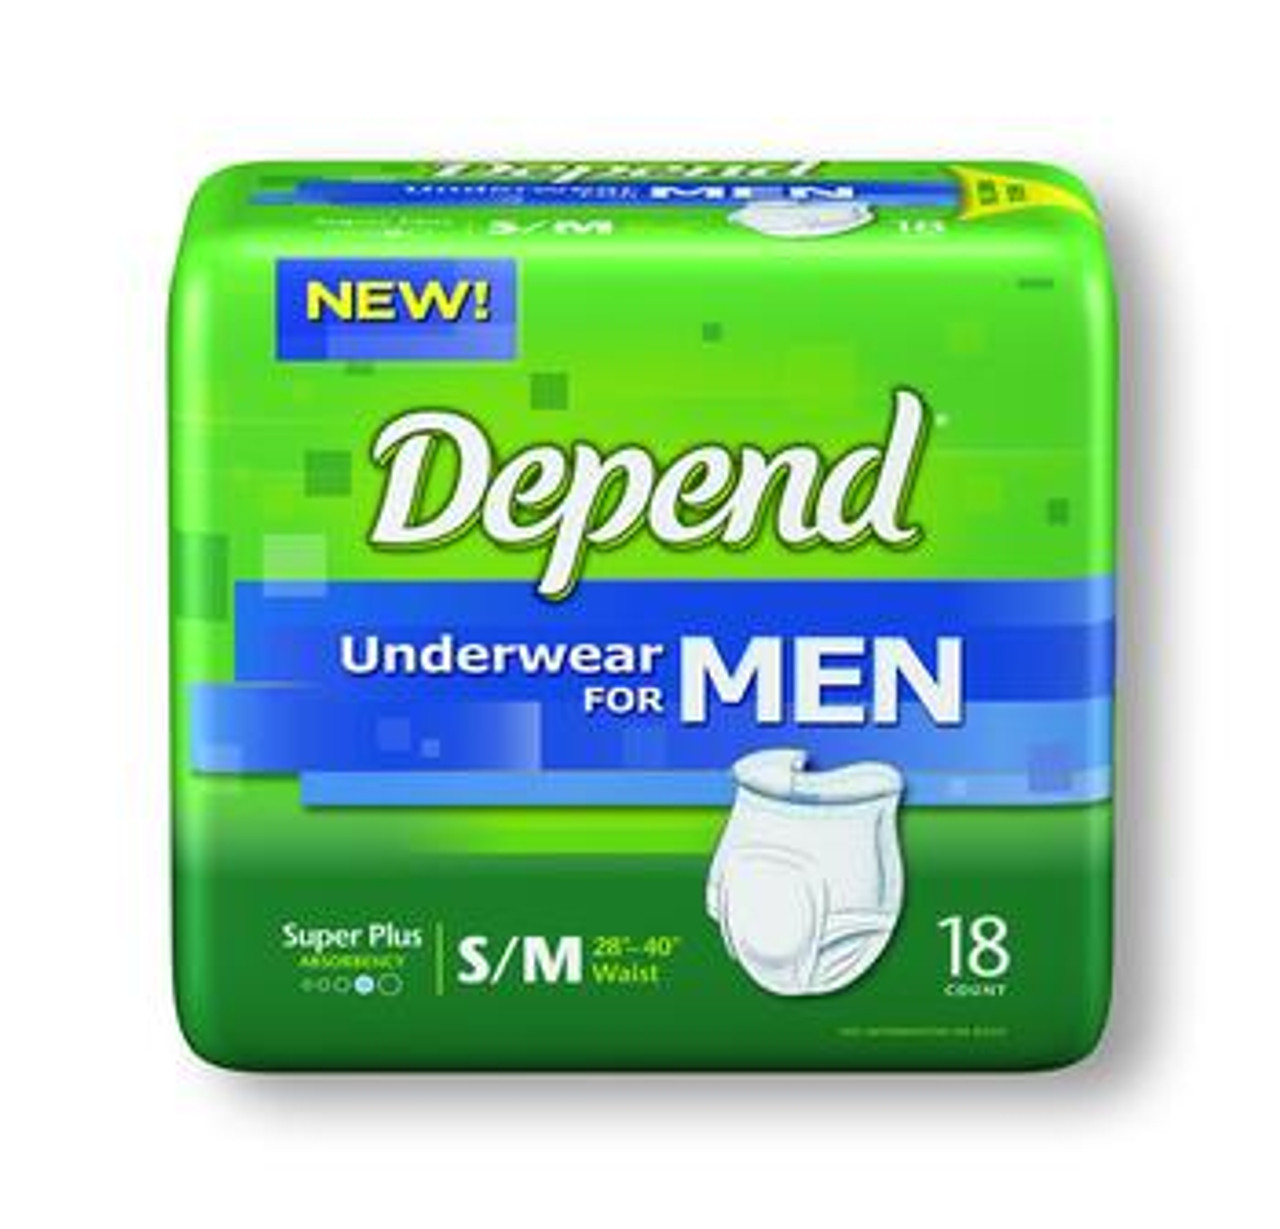 Depend Protective Underwear for Men by Kimberly Clark